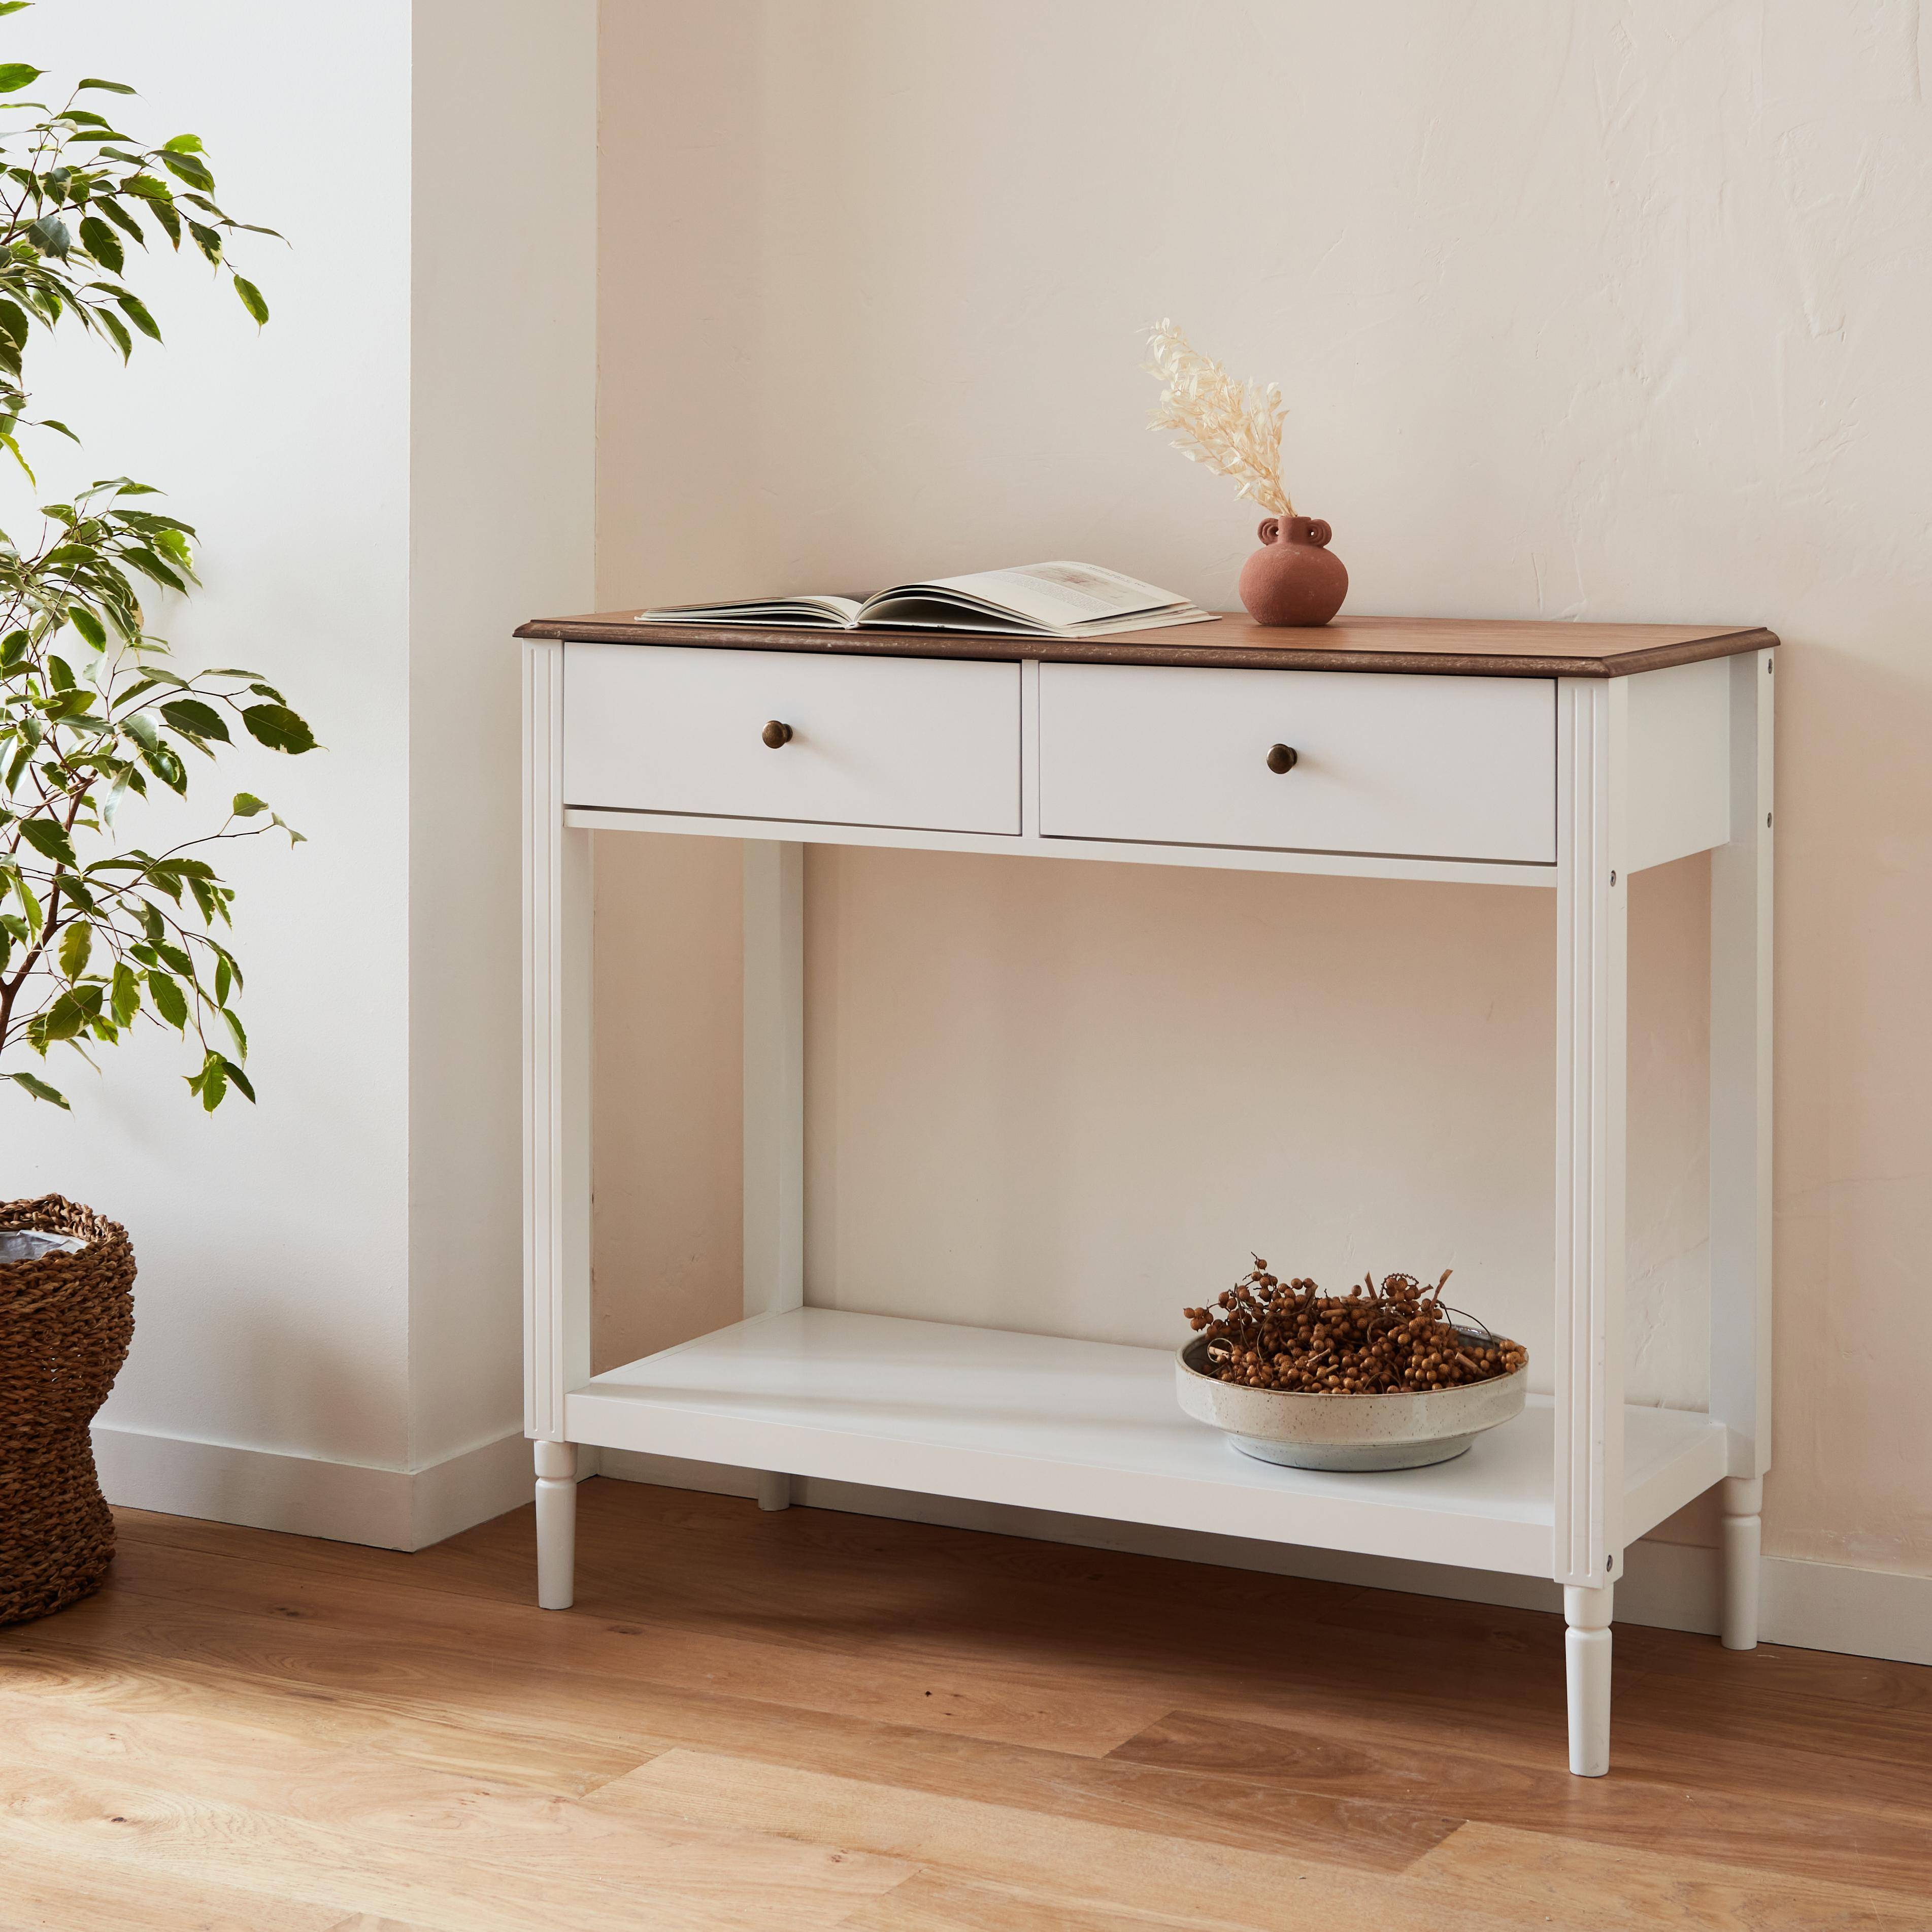 Console table with pinewood legs, 110x40x85cm, Celeste, White,sweeek,Photo2